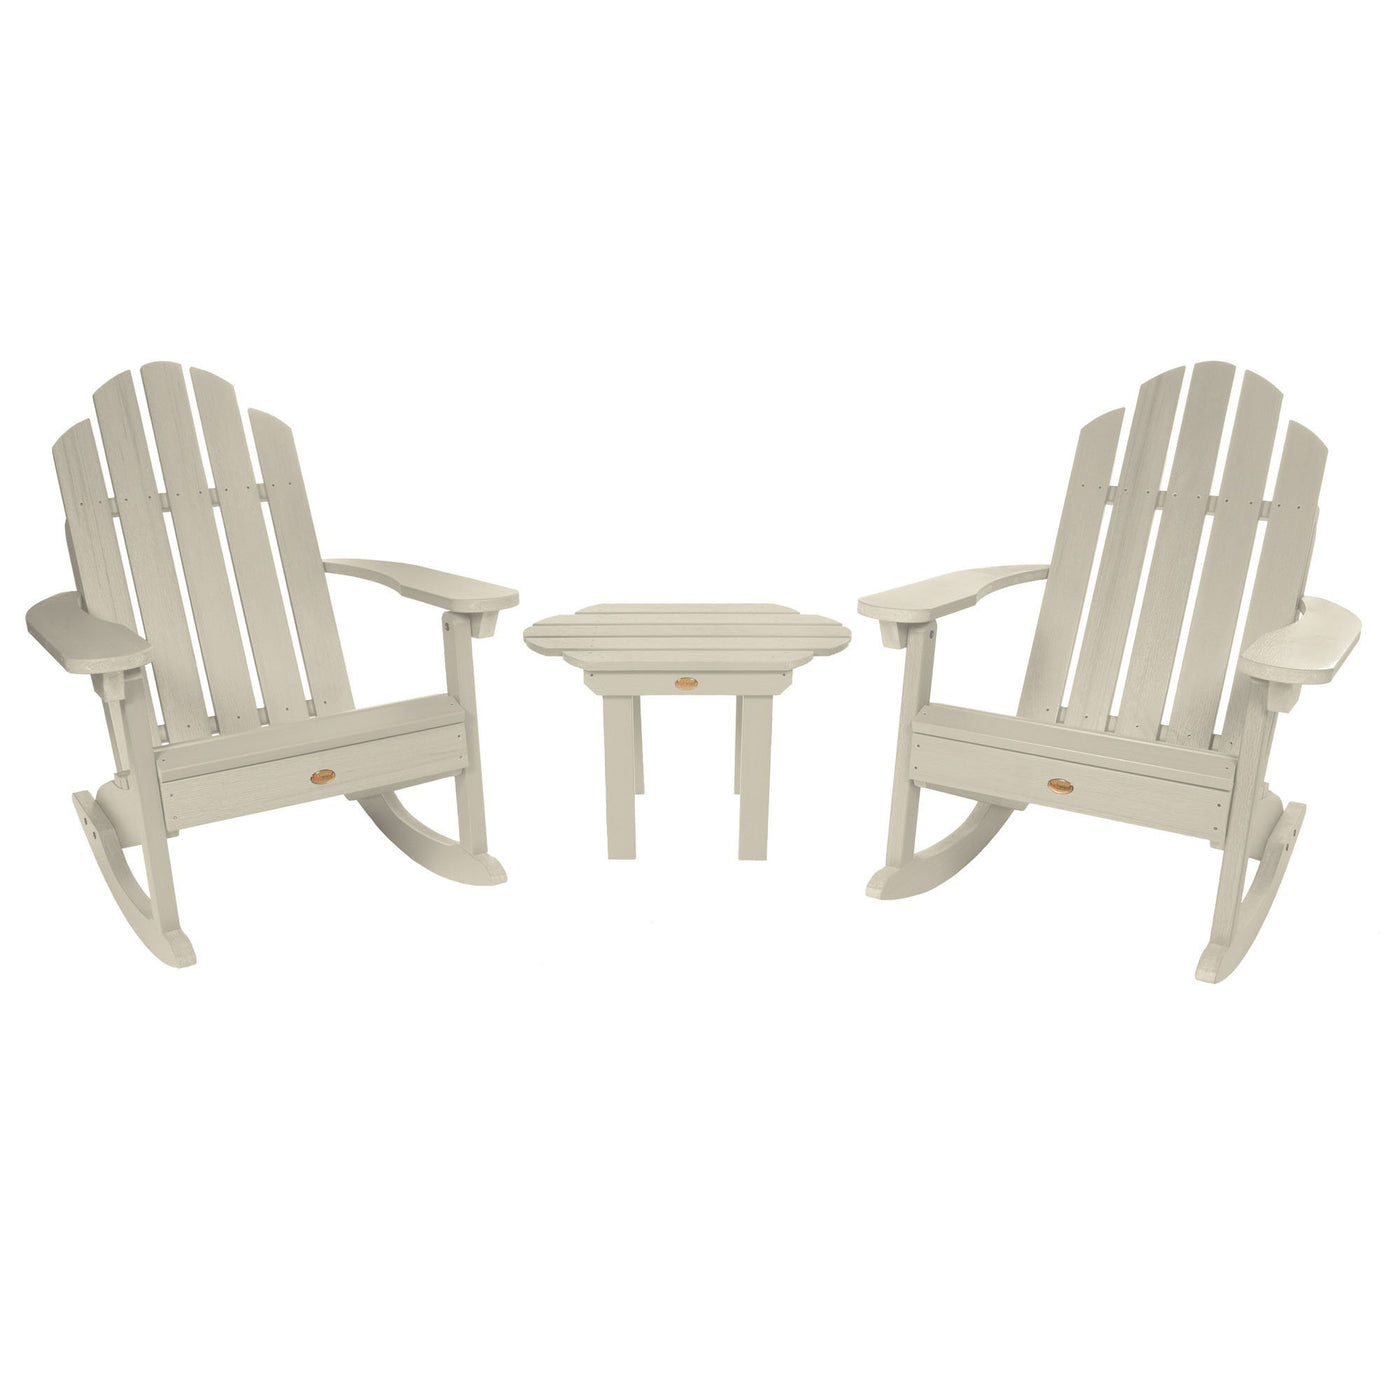 Classic Westport Rocking Chair and Table Set Highwood USA Whitewash 